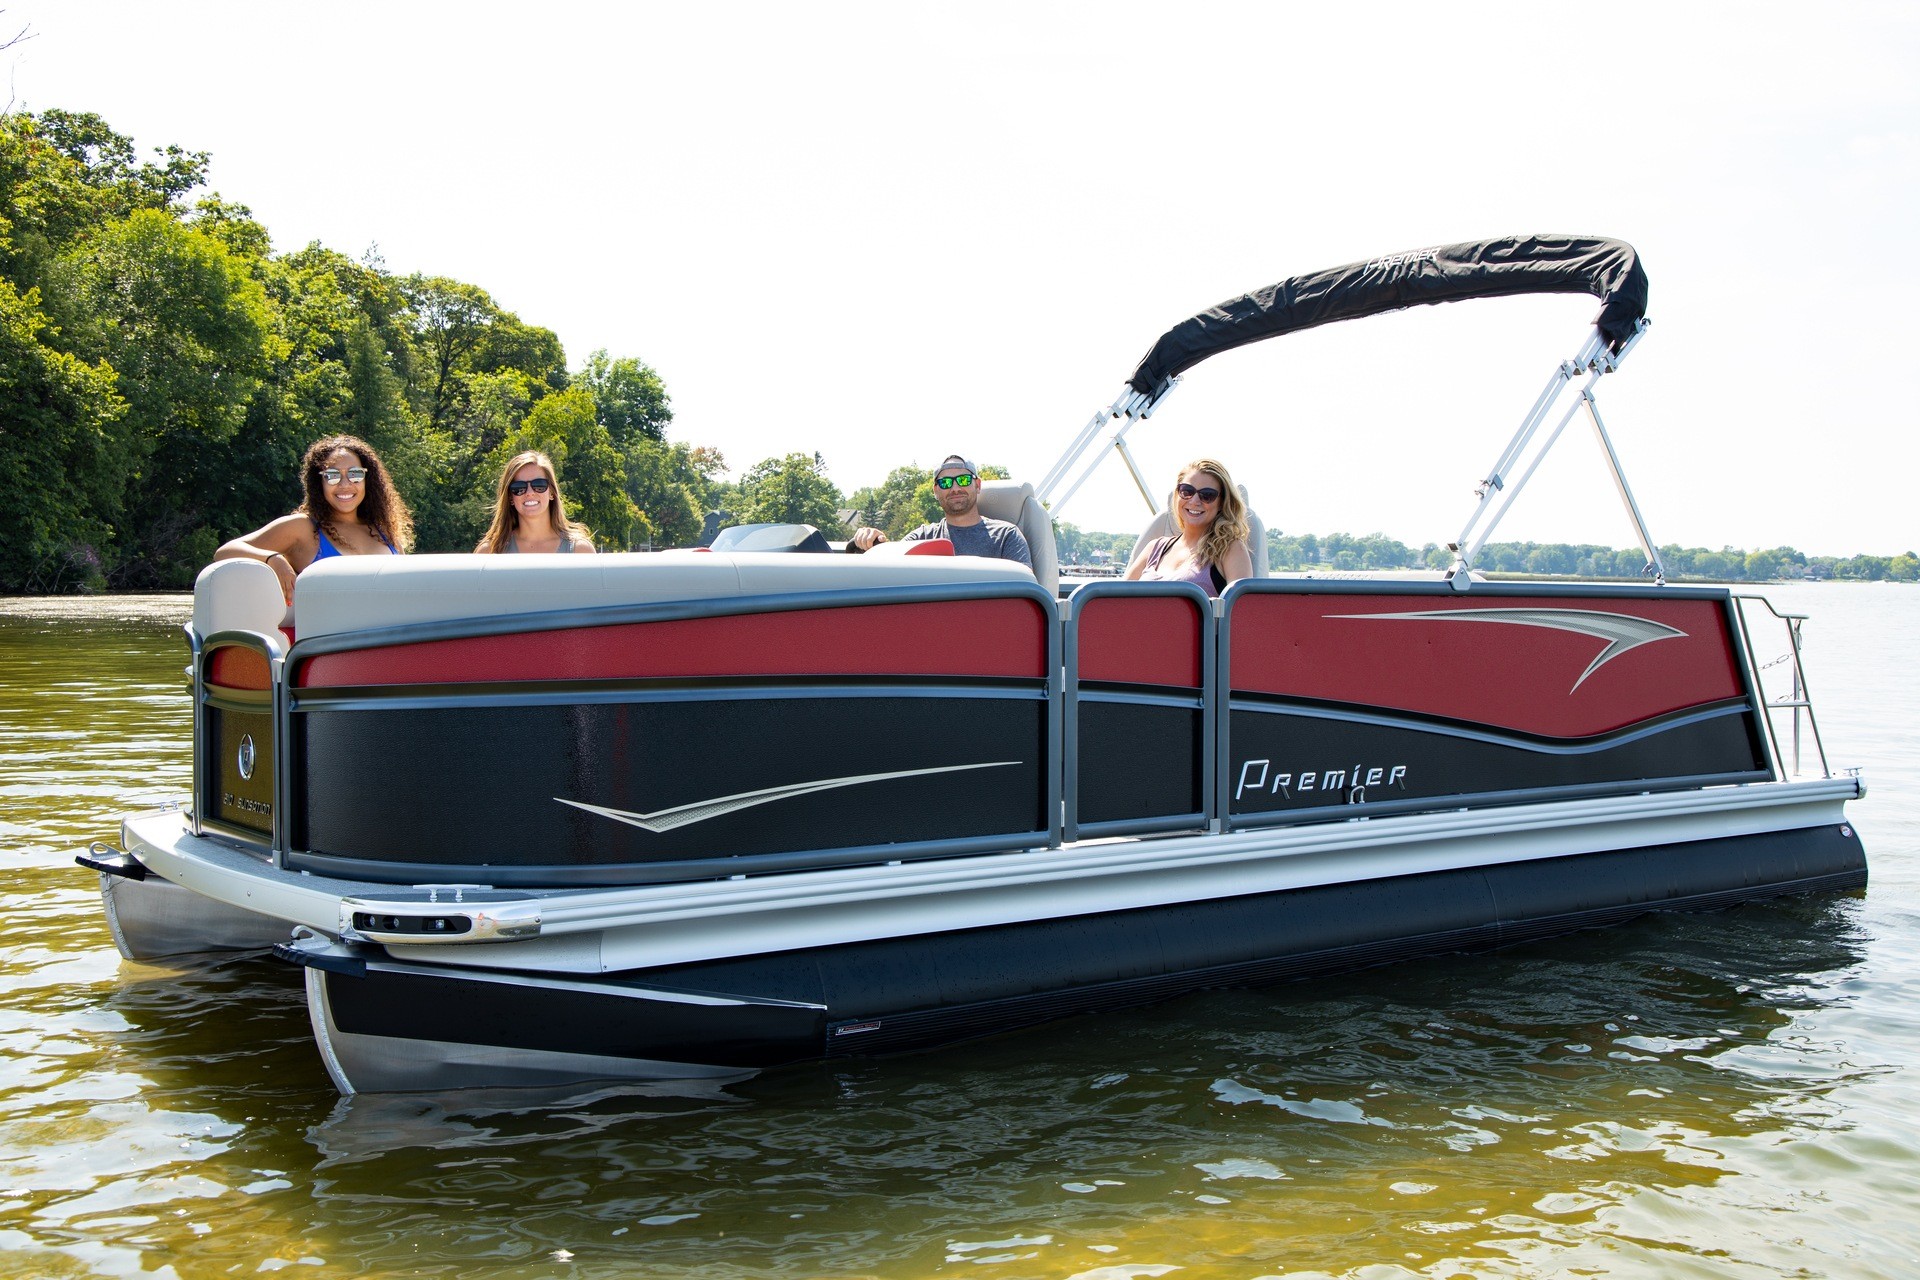 Image Top 3 Reasons to Buy a Pontoon Boat four people on a premier pontoon on the water